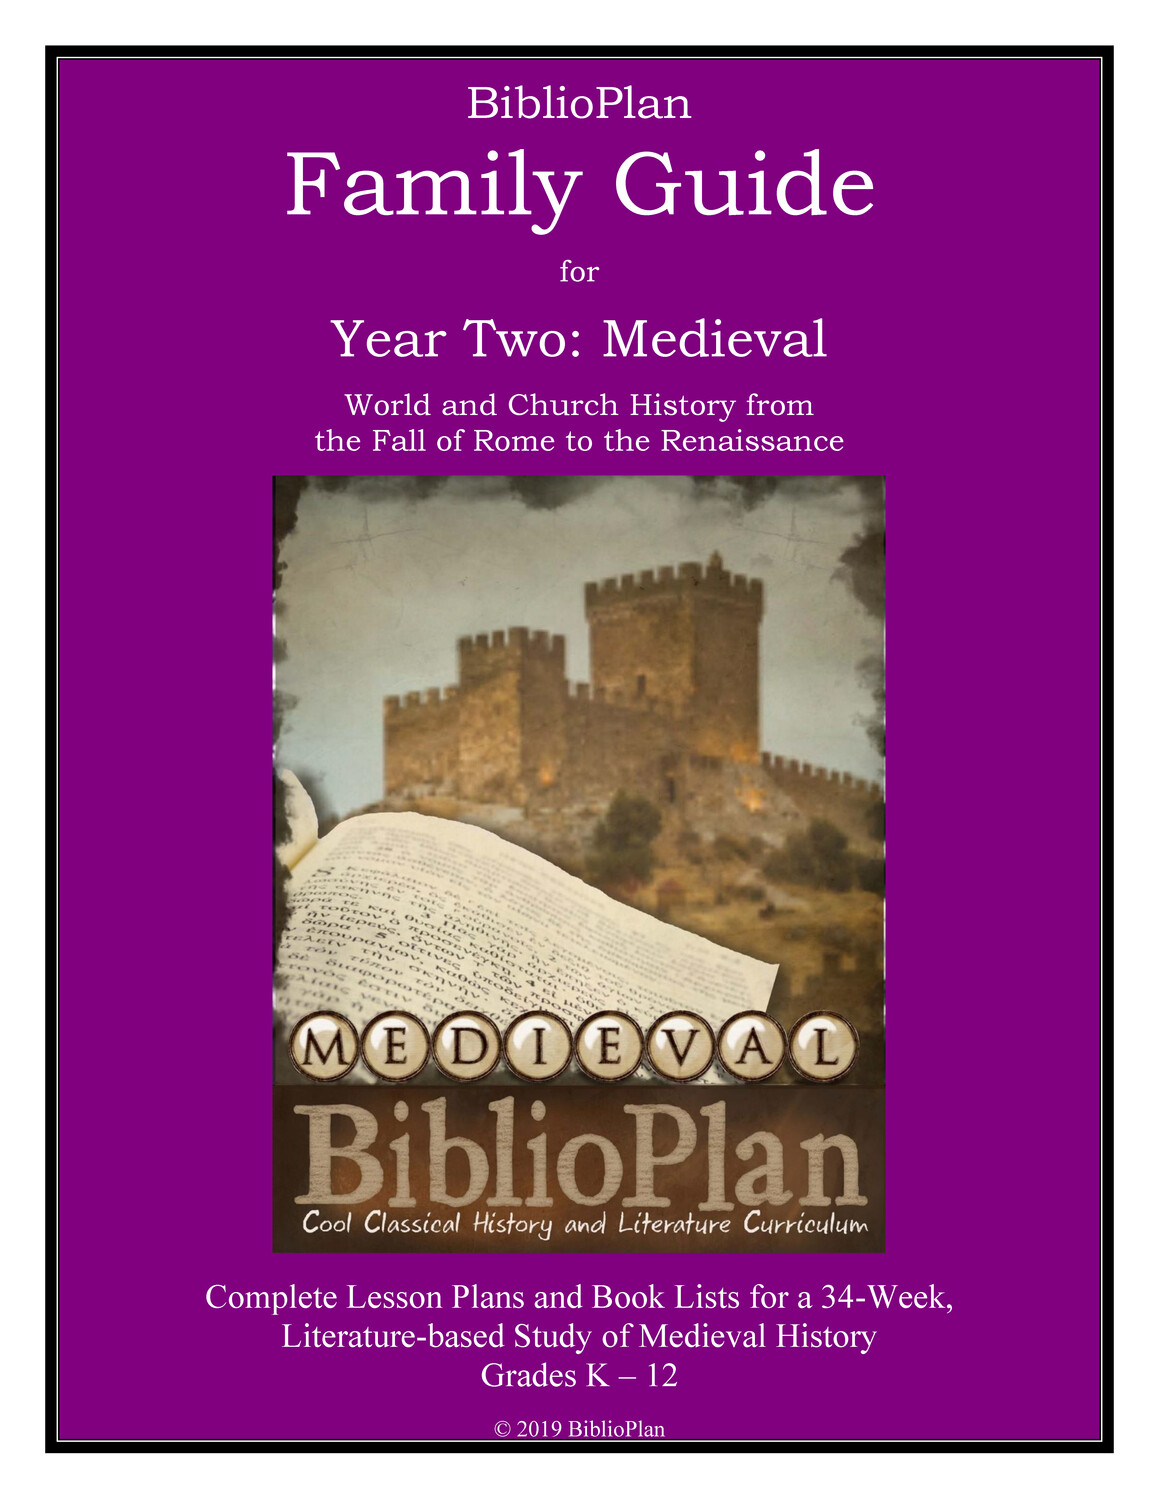 Medieval Family Guide Ebook